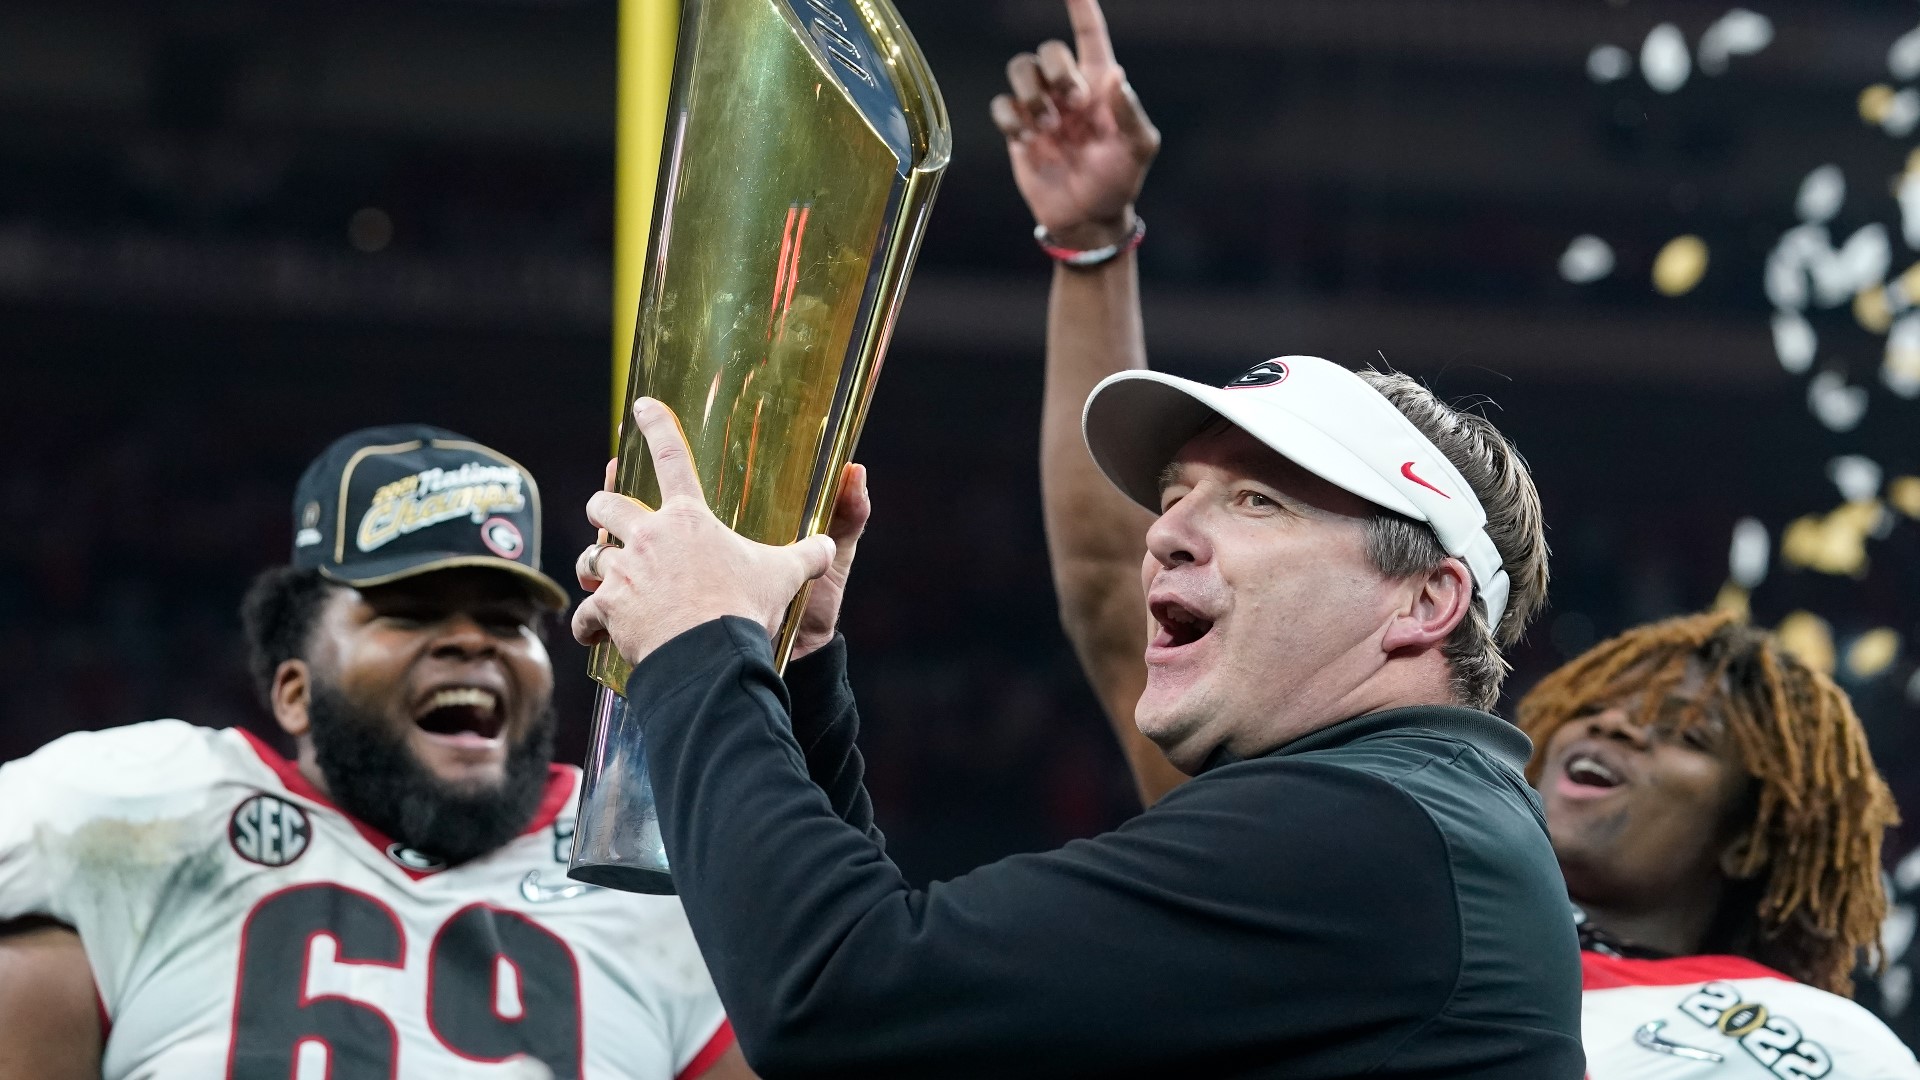 UGA has rewarded Coach Kirby Smart for bringing a national title to Athens - and handsomely.